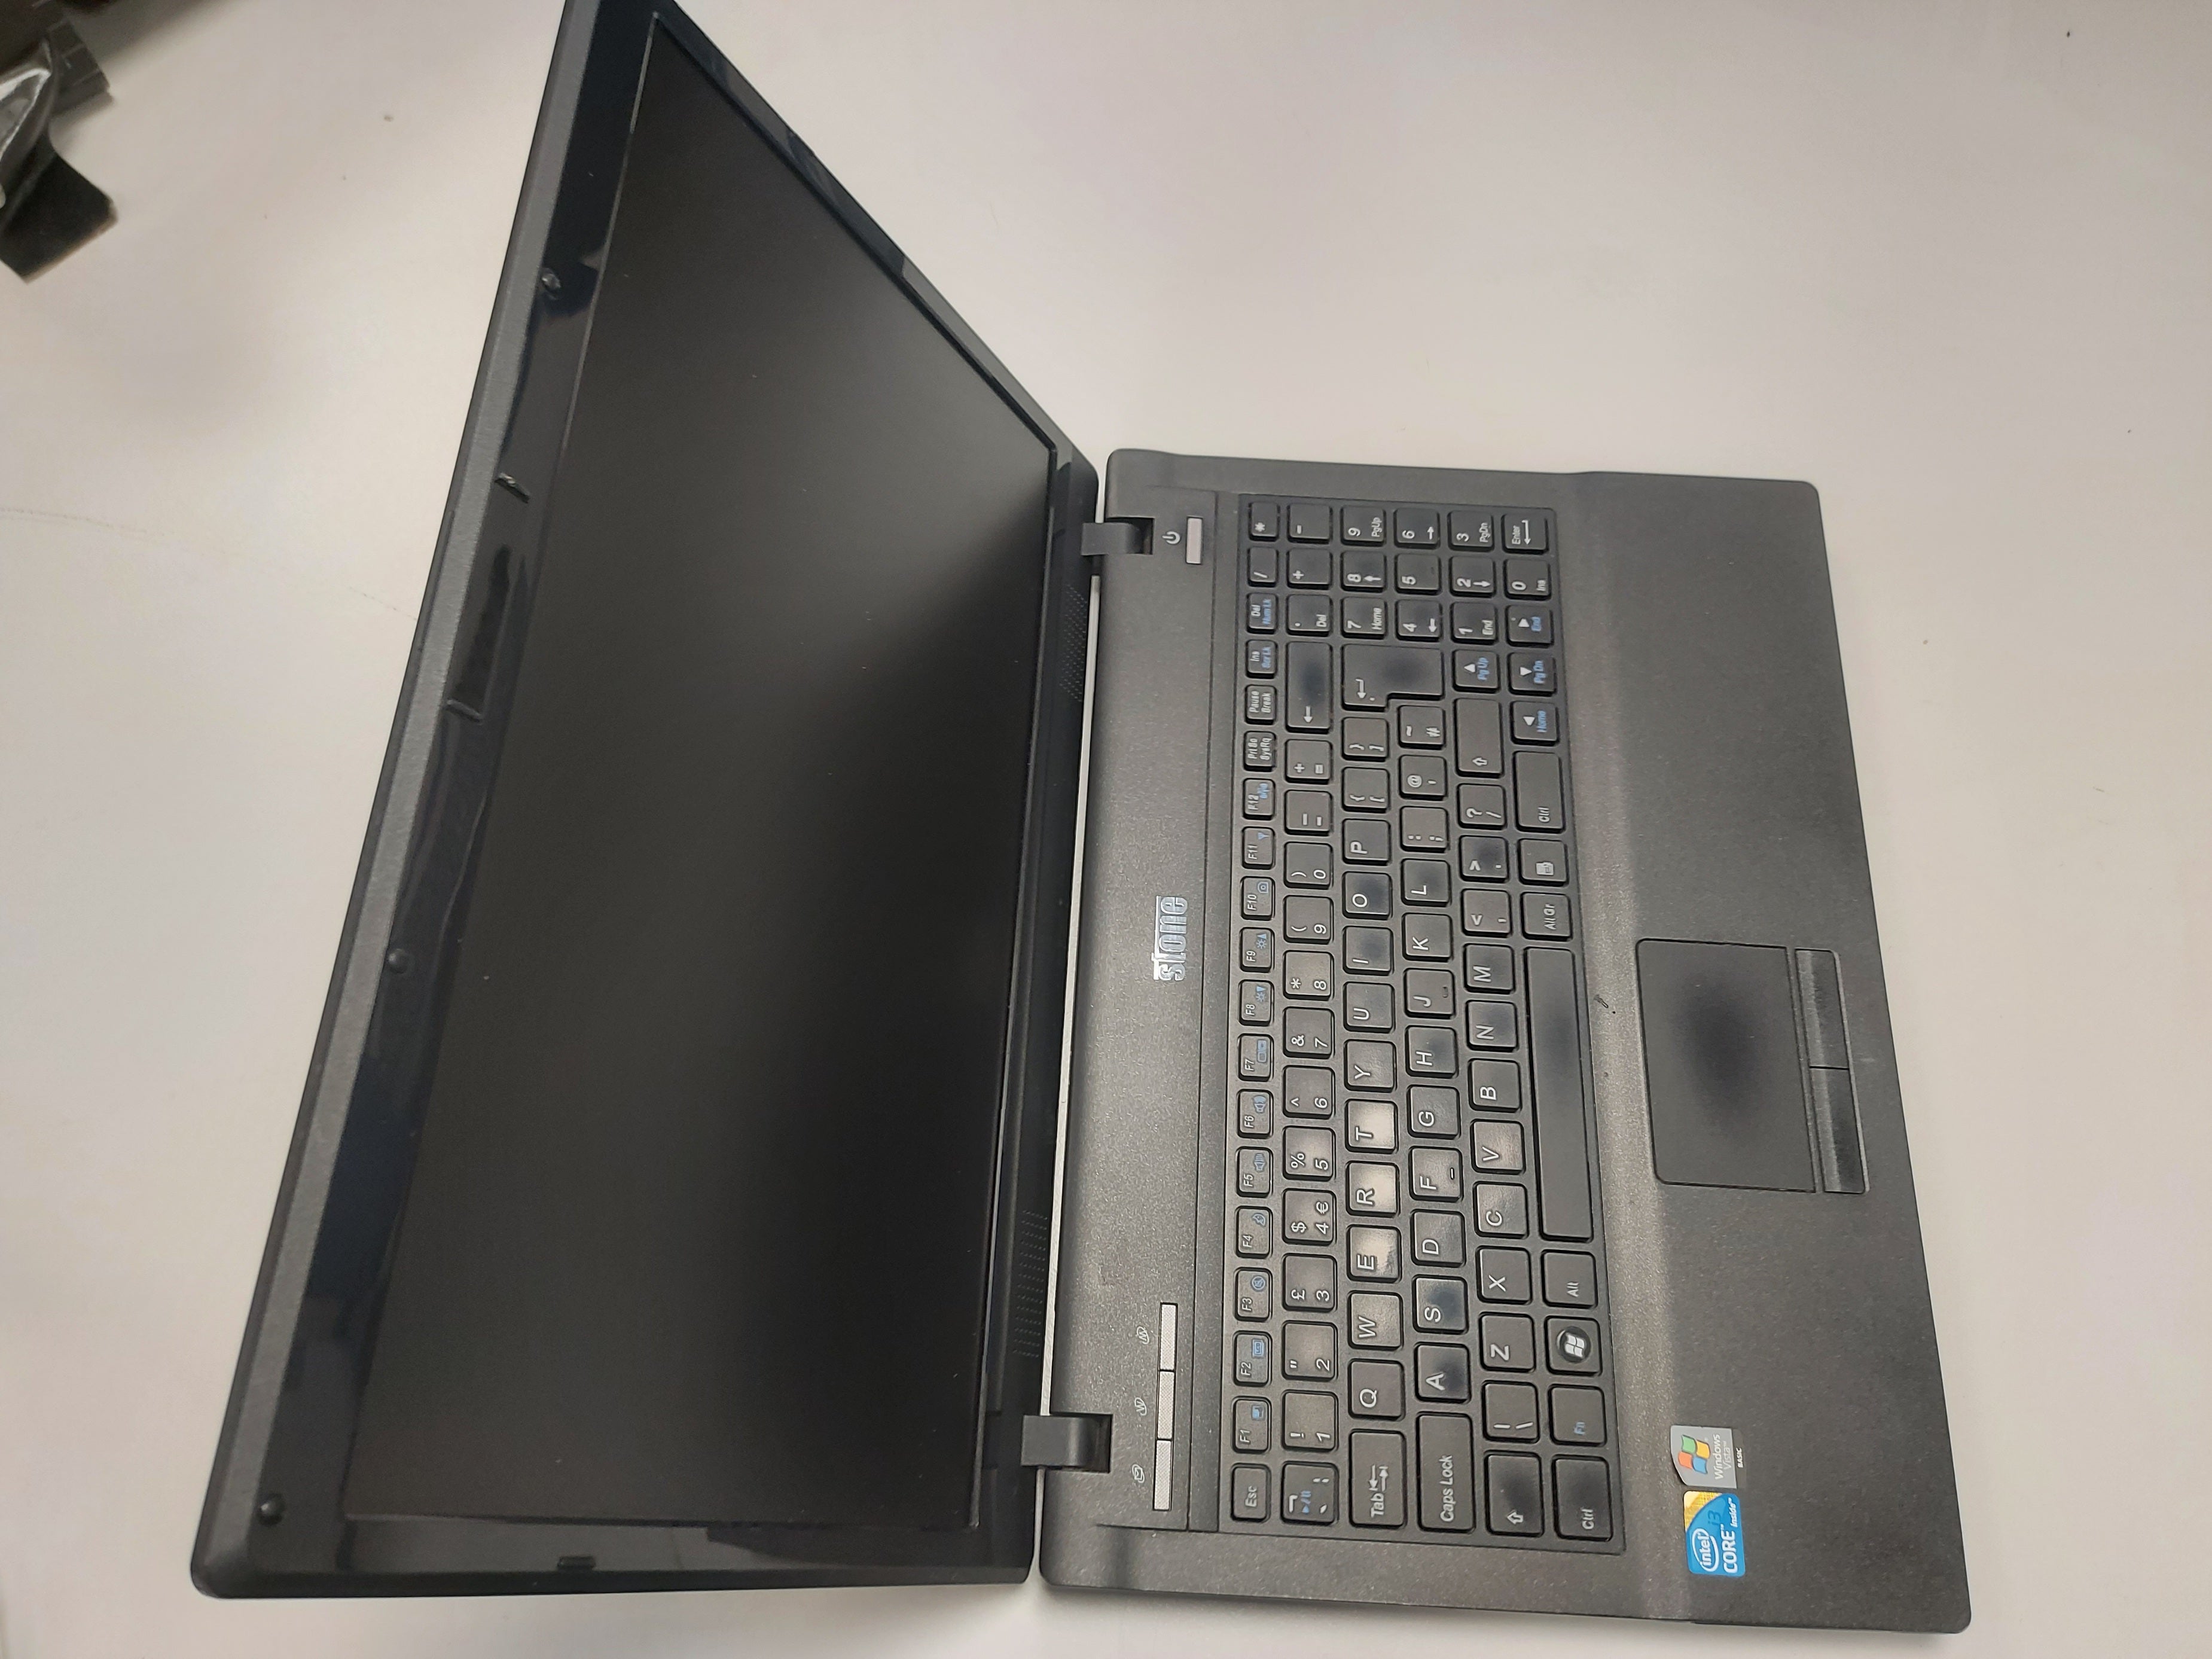 Stone W76C 500GB HDD Core i3-M370 2400MHz 4GB RAM 15.6" Notebook Computer USED